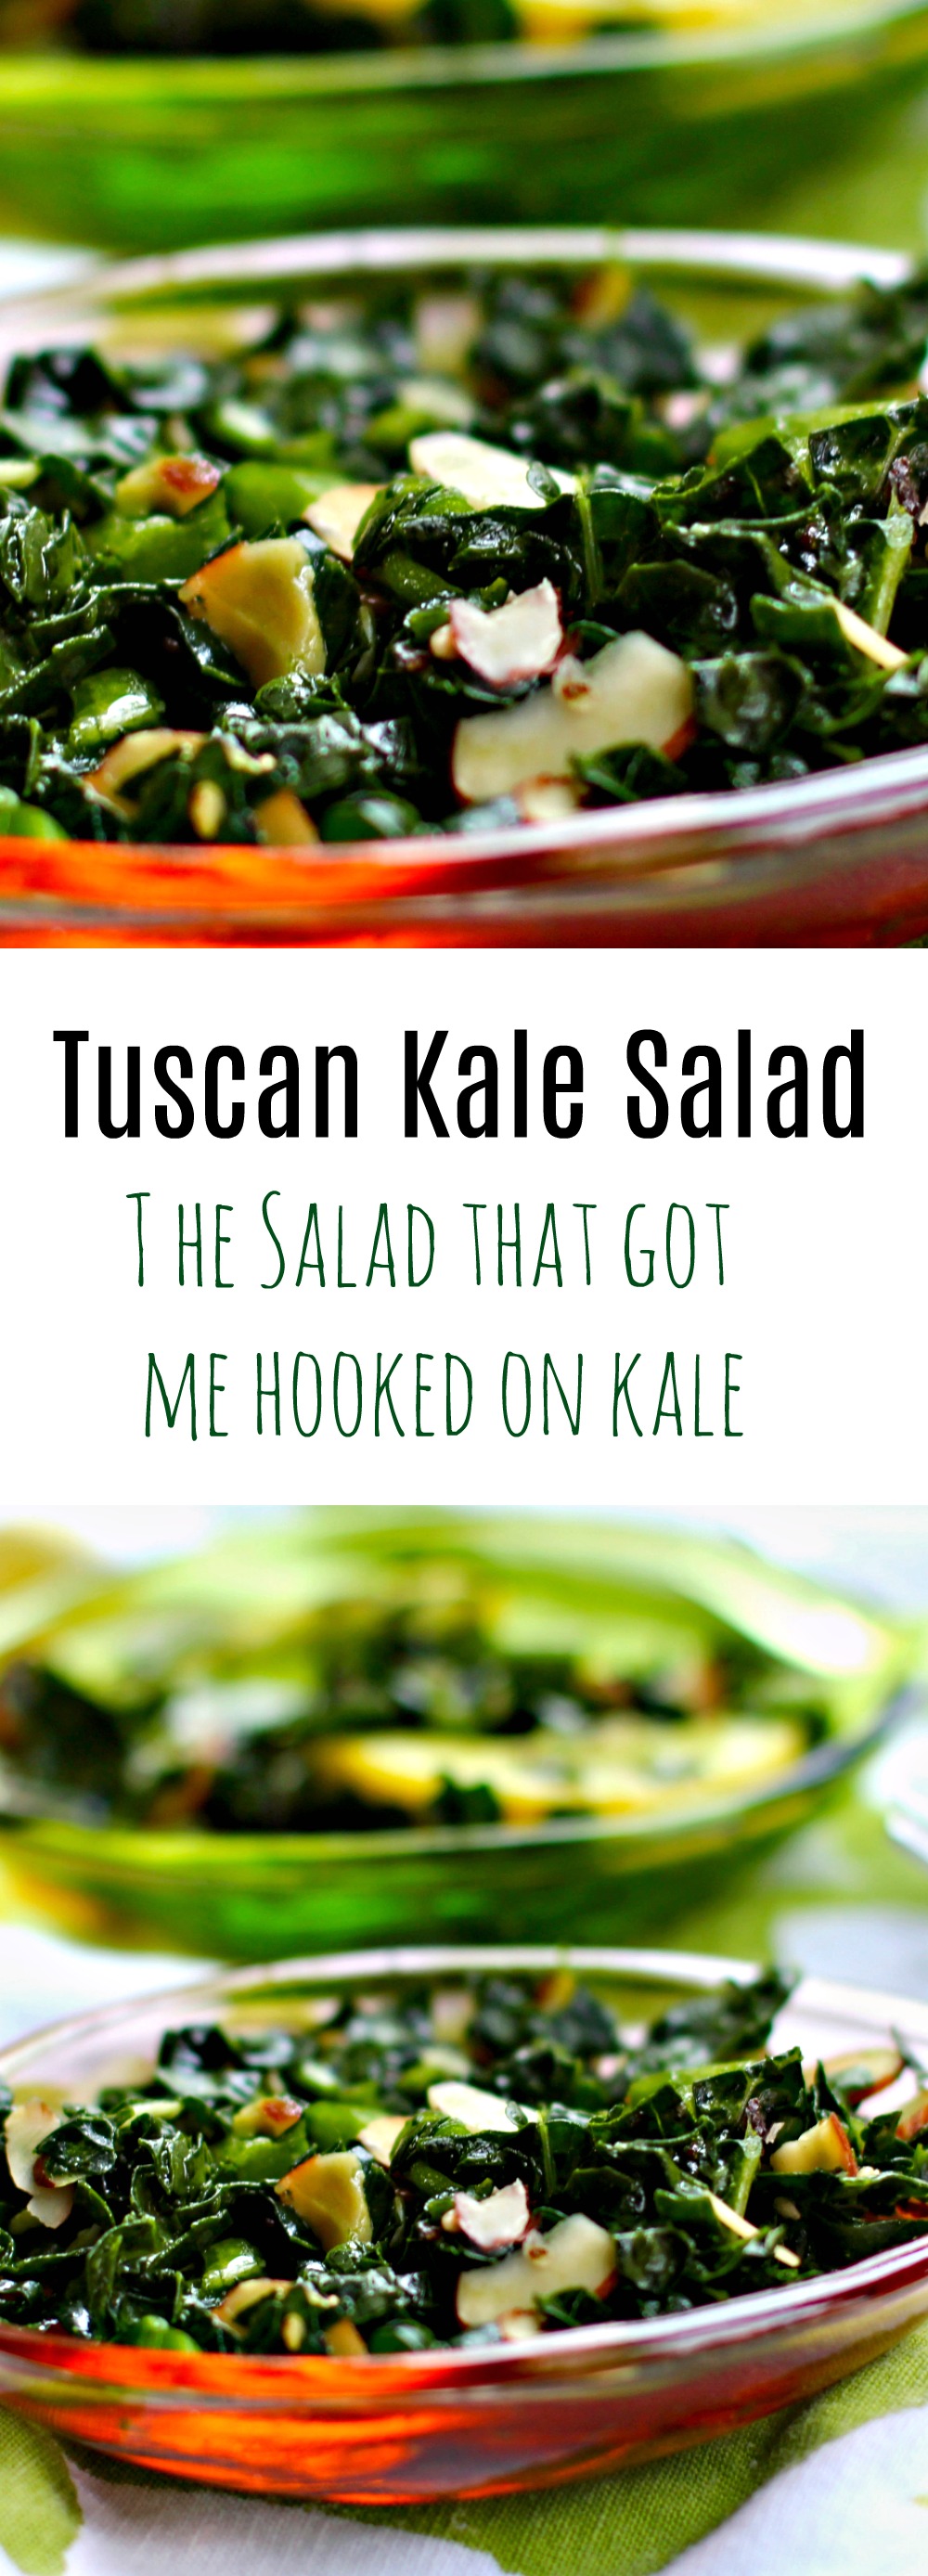 Chopped Kale Salad Tuscan Style from Spinach TIger